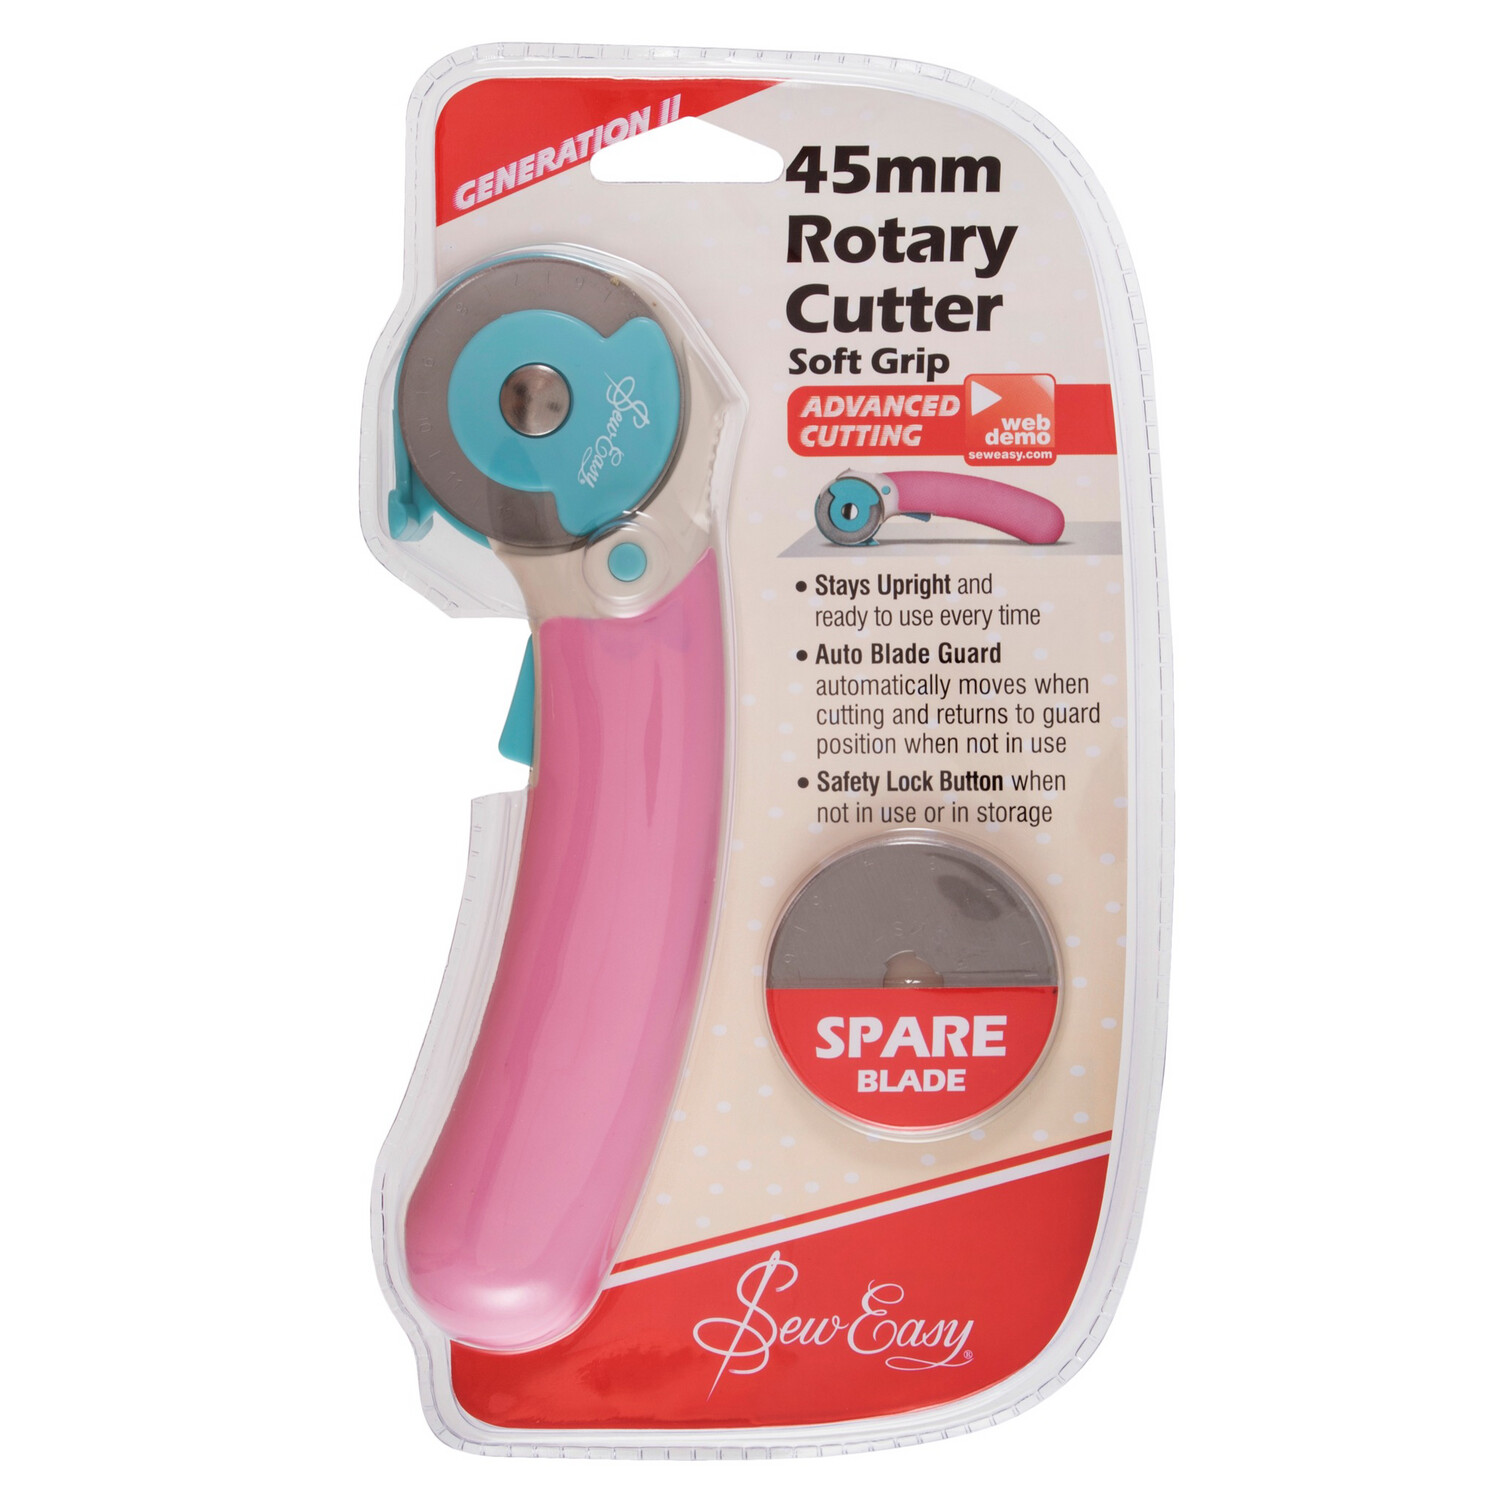 Rotary Cutter : 45mm